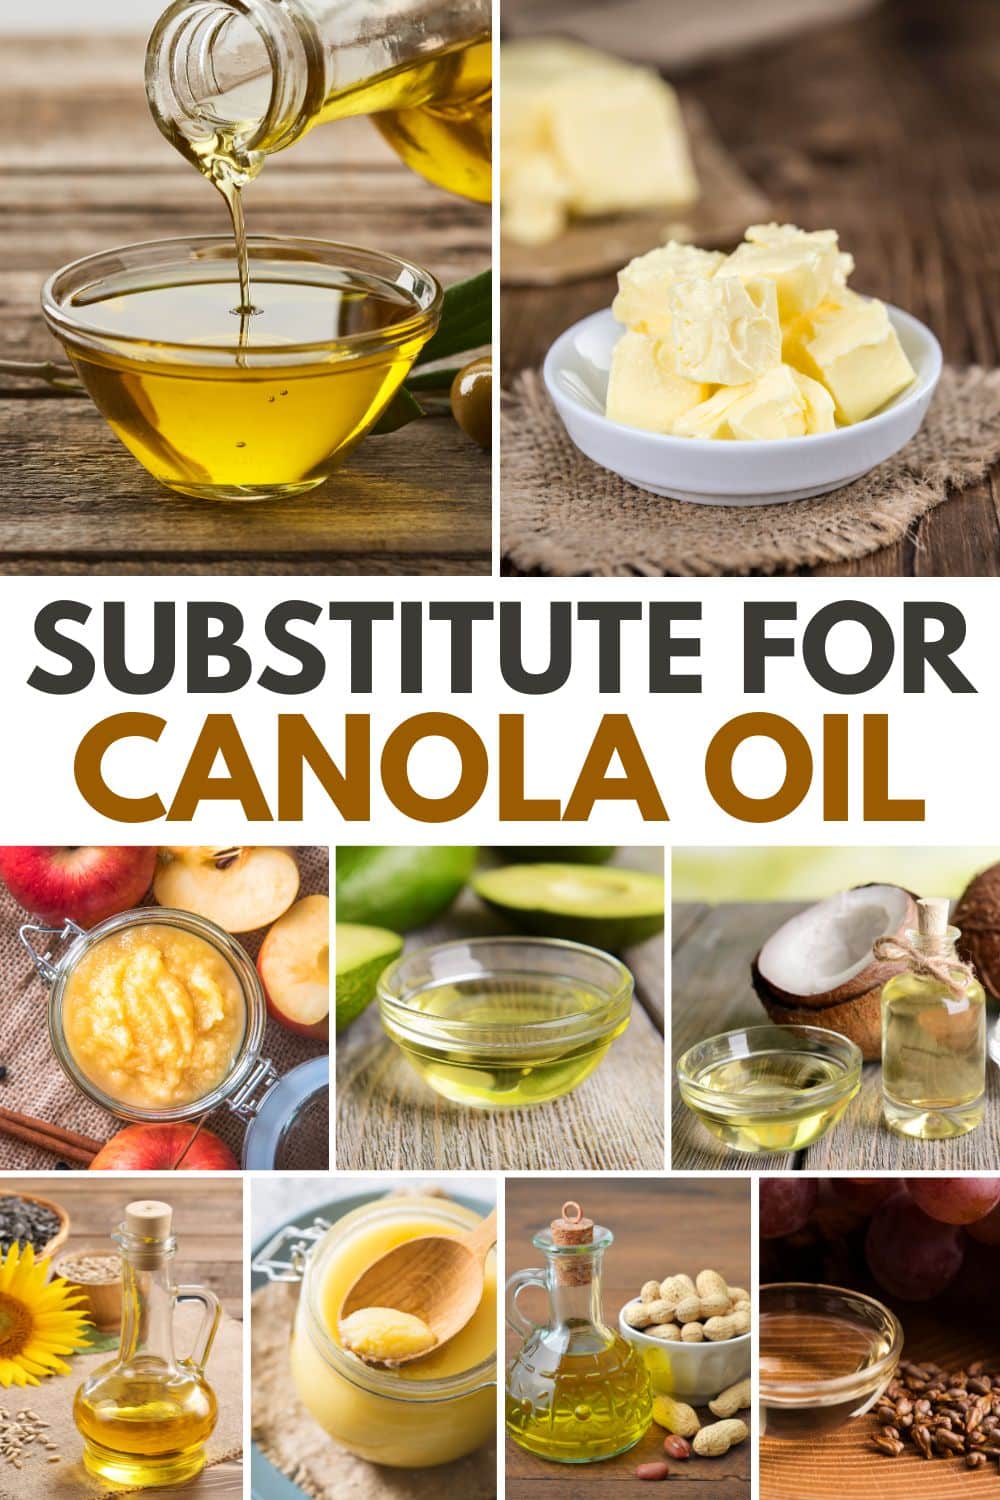 A collage of images showcasing canola oil alternatives.